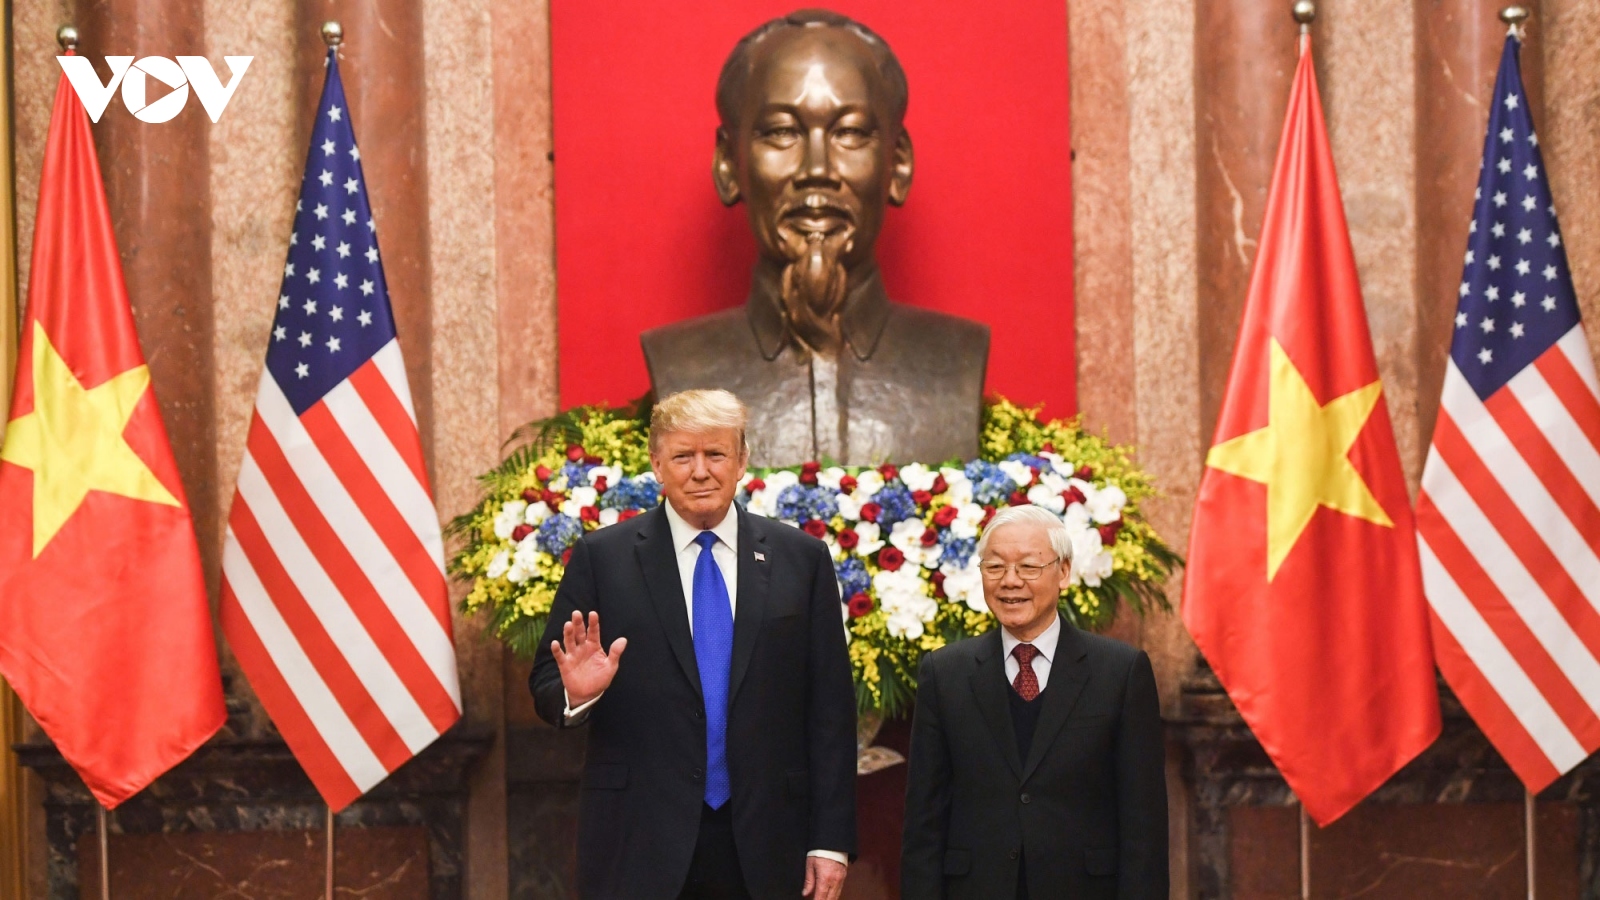 How many US Presidents have visited Vietnam?